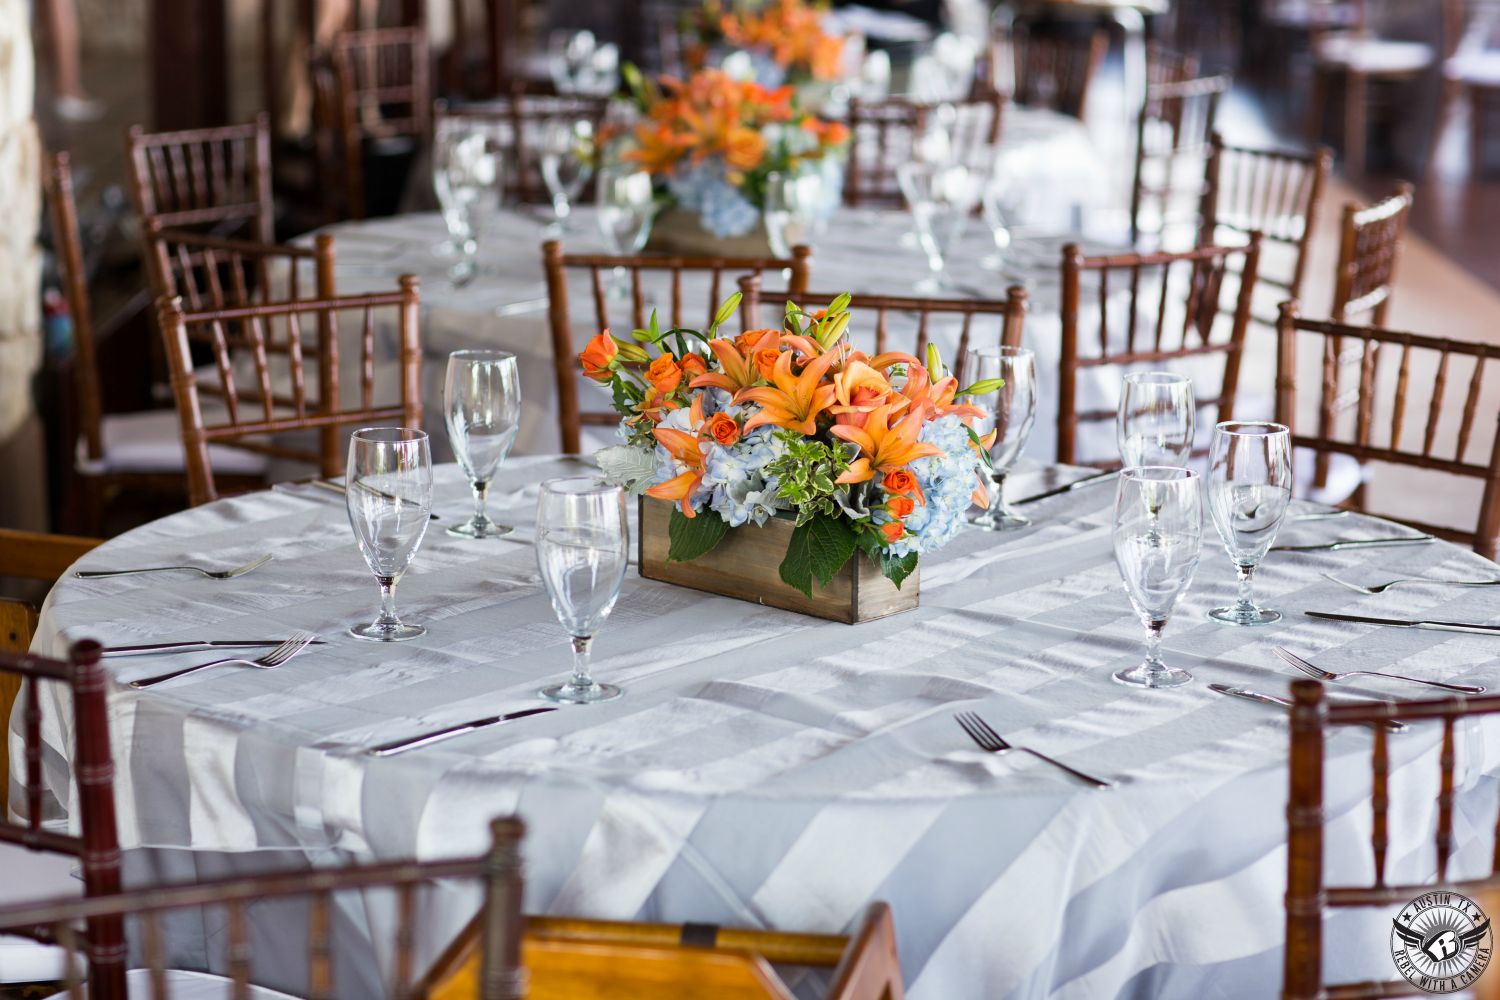 Gorgeous wedding tablescape with grey striped linens, dark wooden chivari chairs, and orange lily floral and light blue hydrangea centerpieces by Bouquets of Austin on the deck at Nature's Point, the Austin wedding venue on Lake Travis.